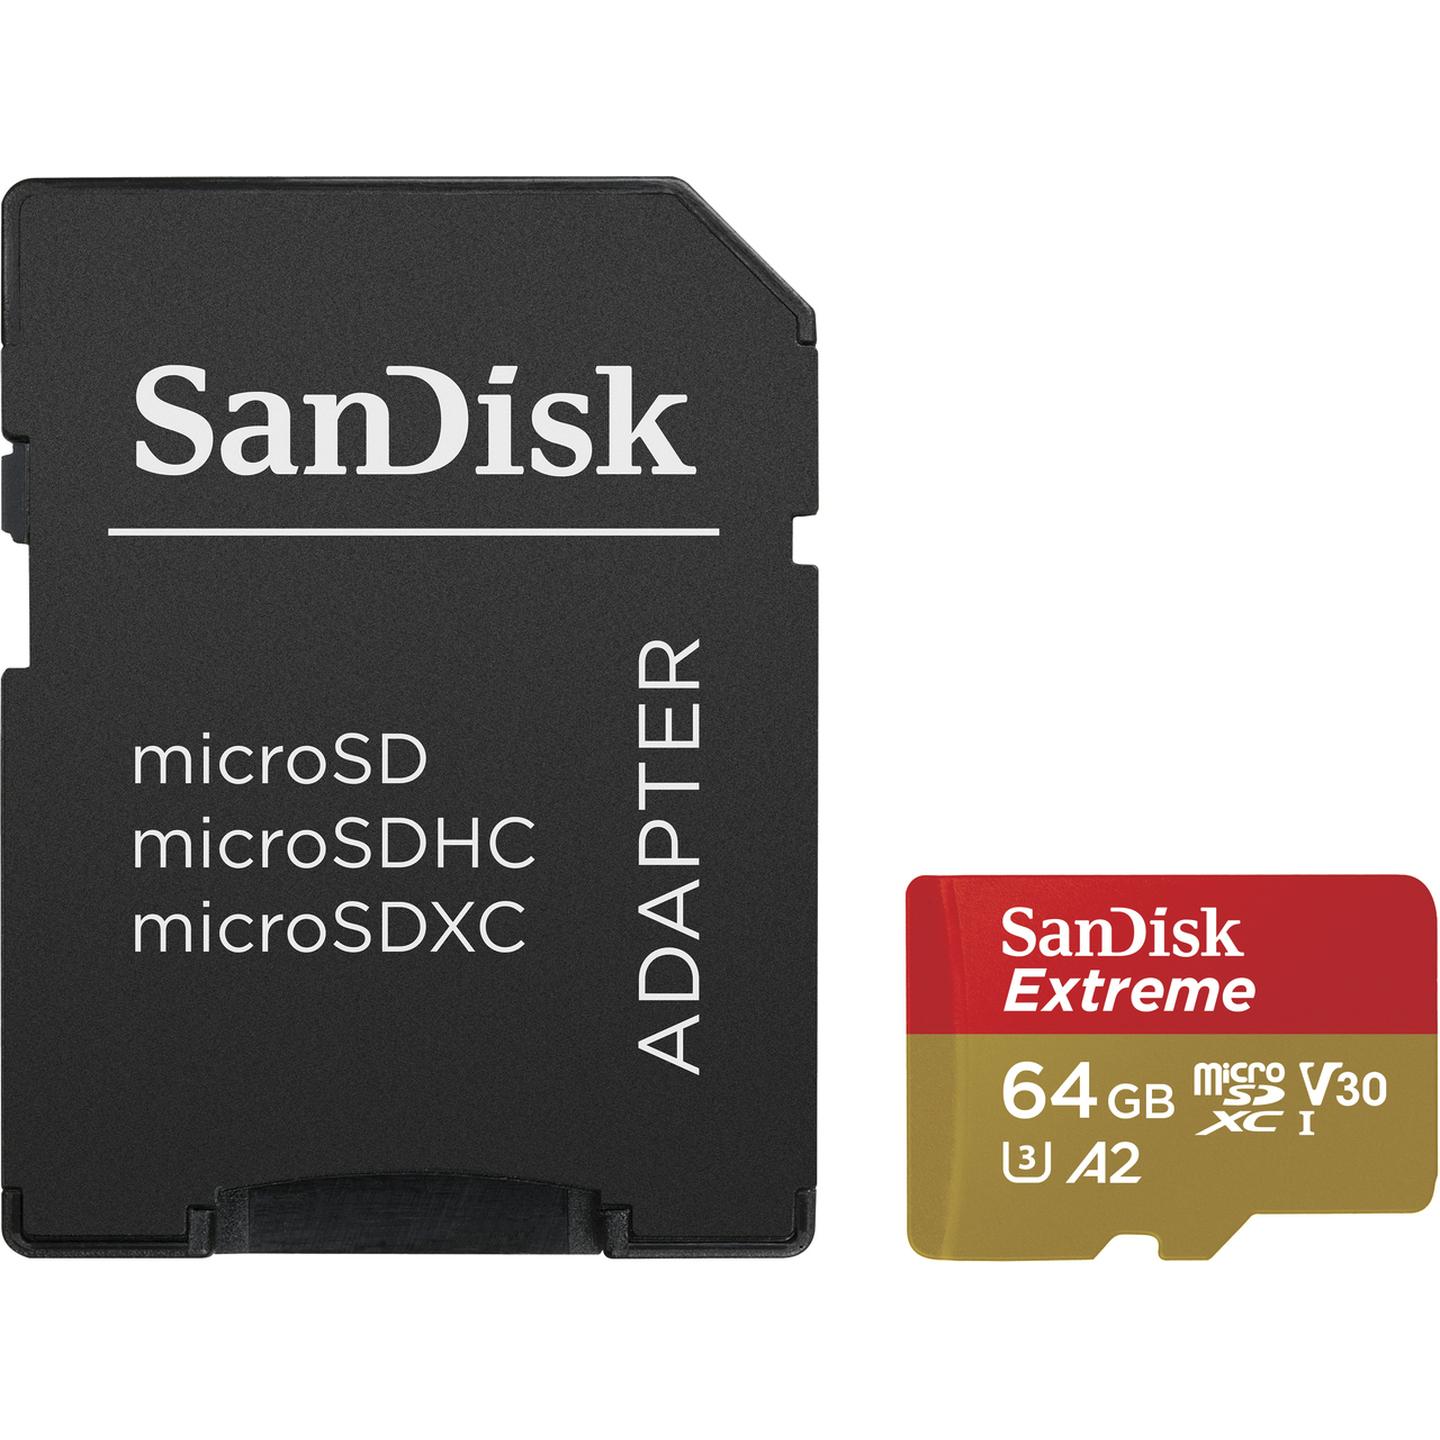 Sandisk 64GB High Extreme microSDXC Class 10 Reads 170MB/S Writes 80MB/S 